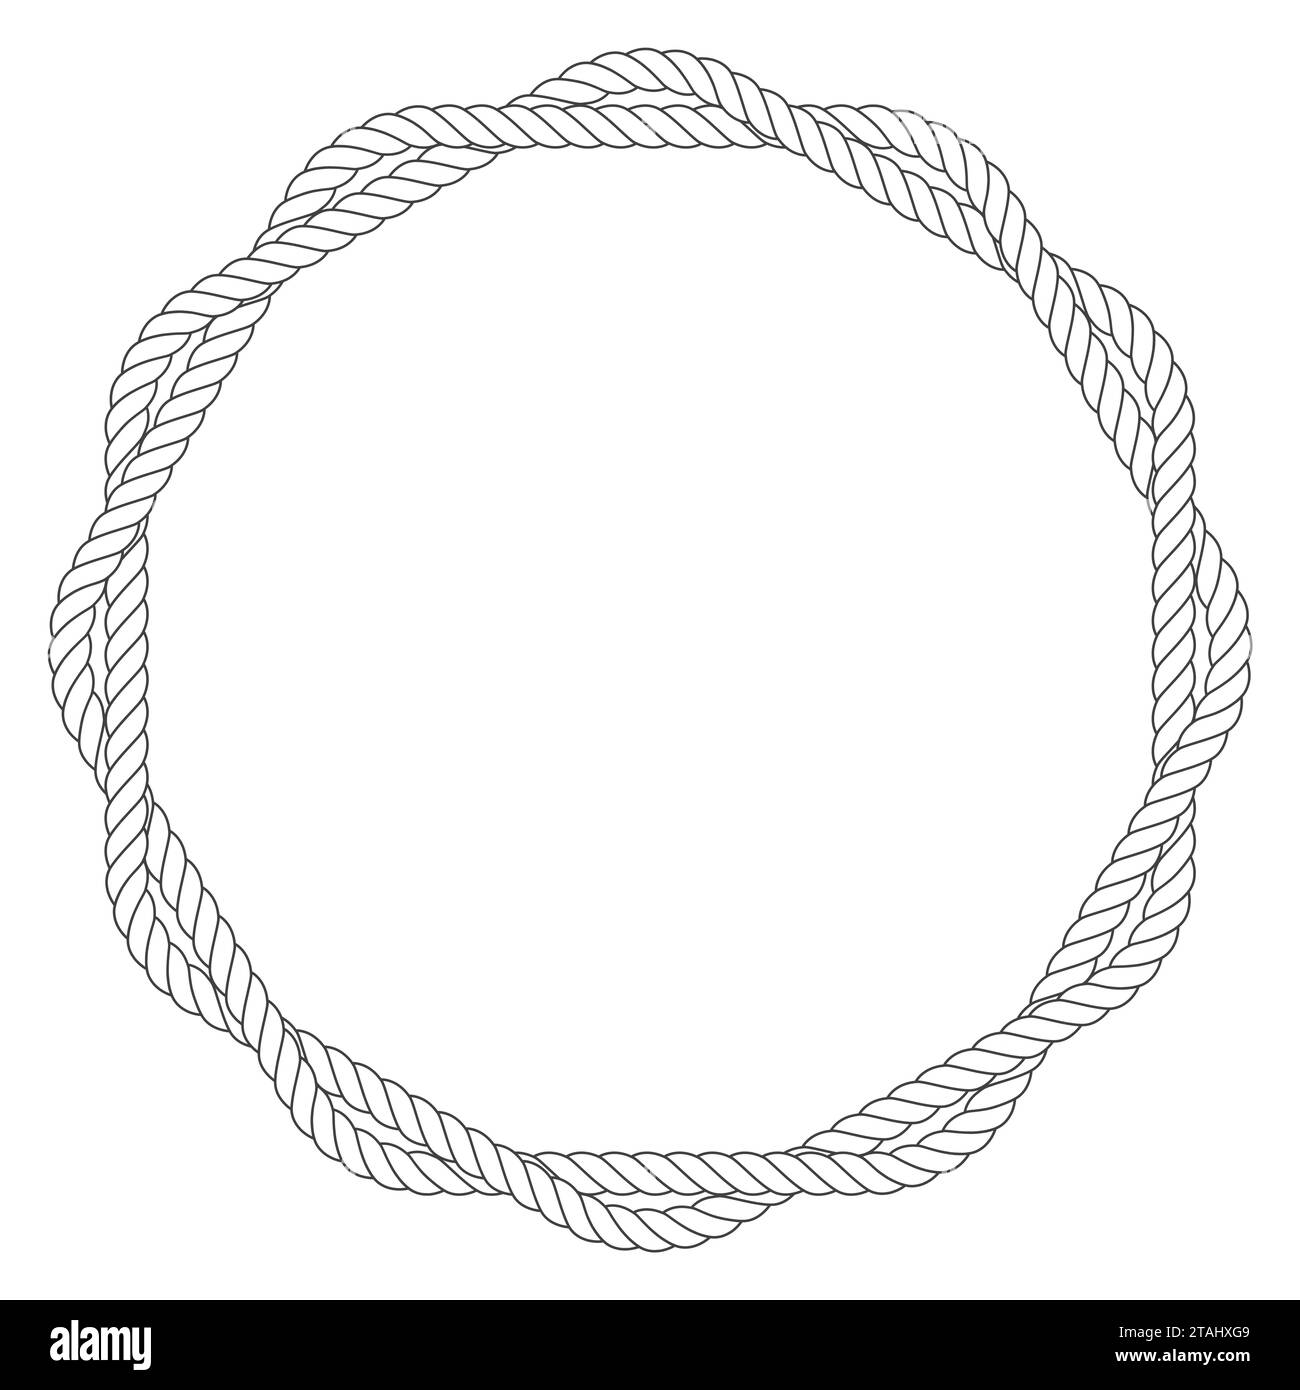 Round rope frame with two twisted ropes, nautical circle frame, vector Stock Vector